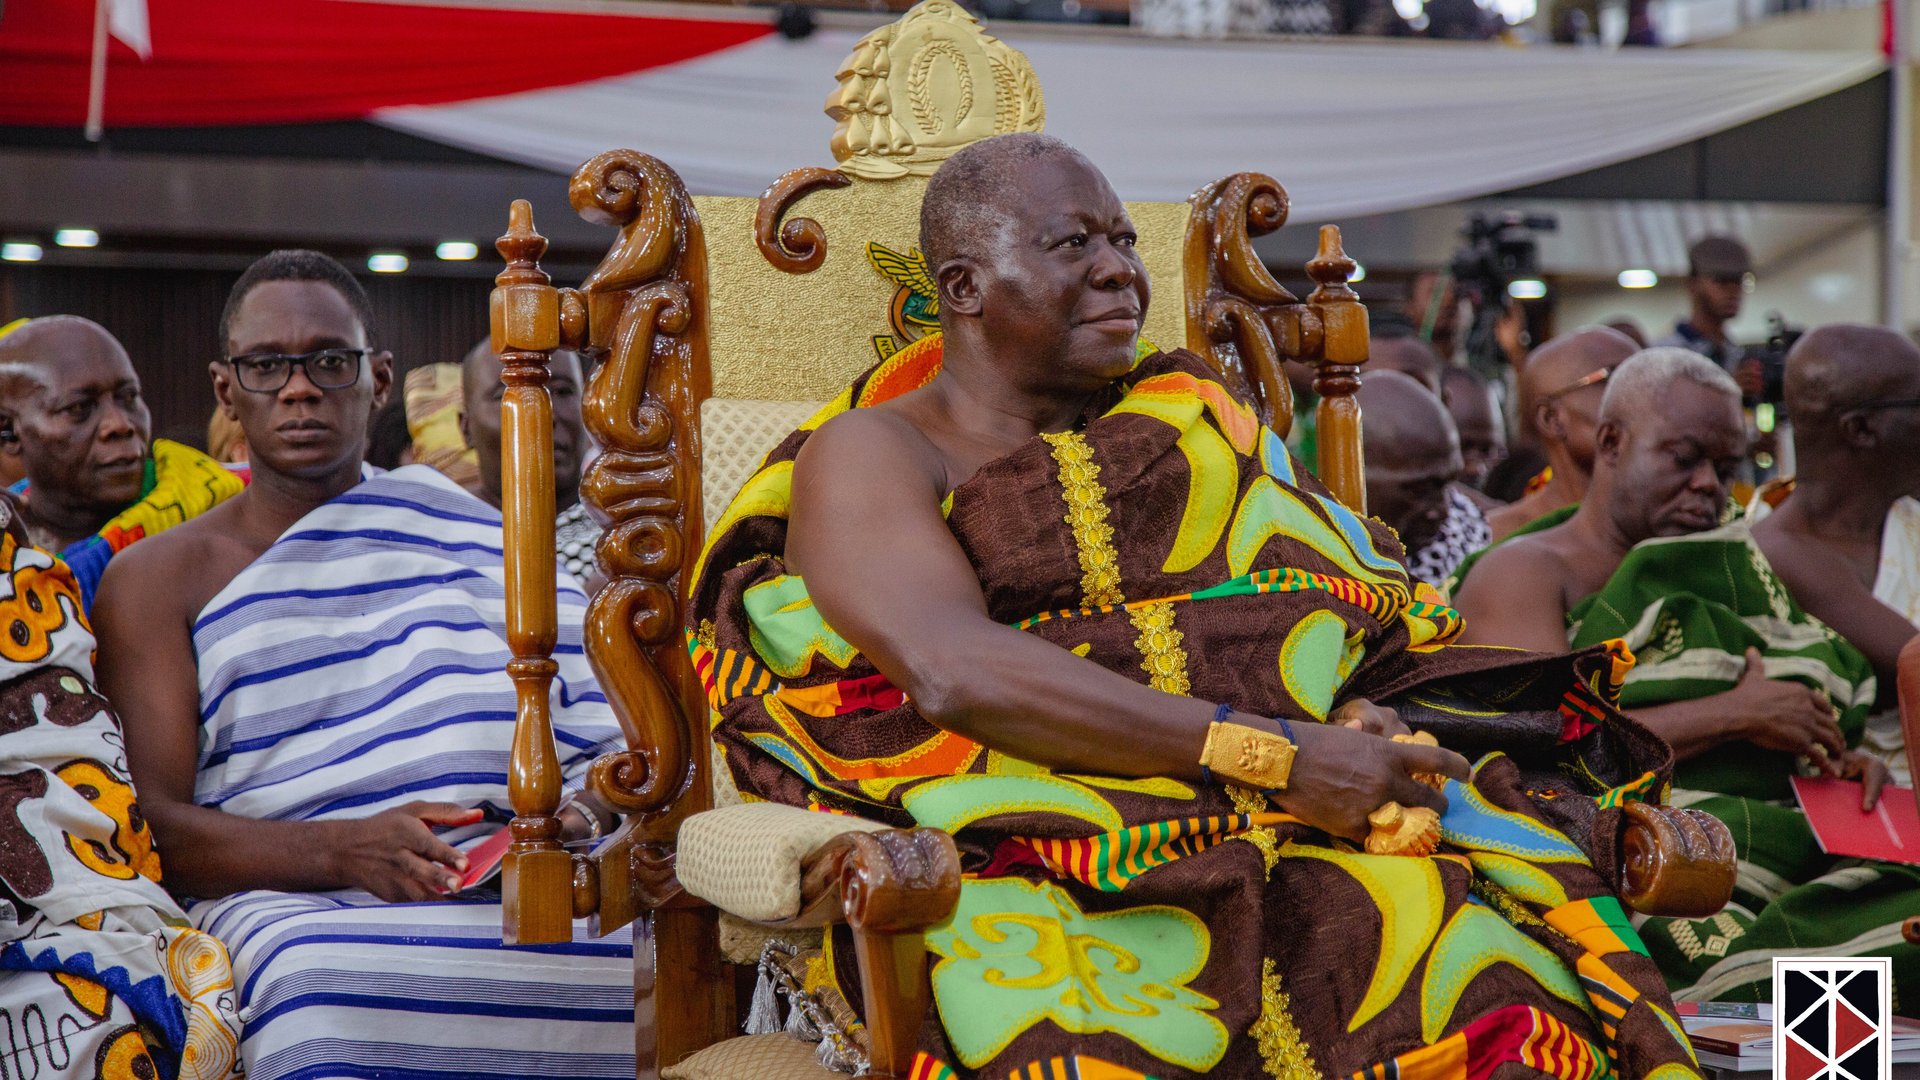 The photo shows the King, Asantehene Otumfuo Osei Tutu II, in the front row of the university's packed Great Hall.